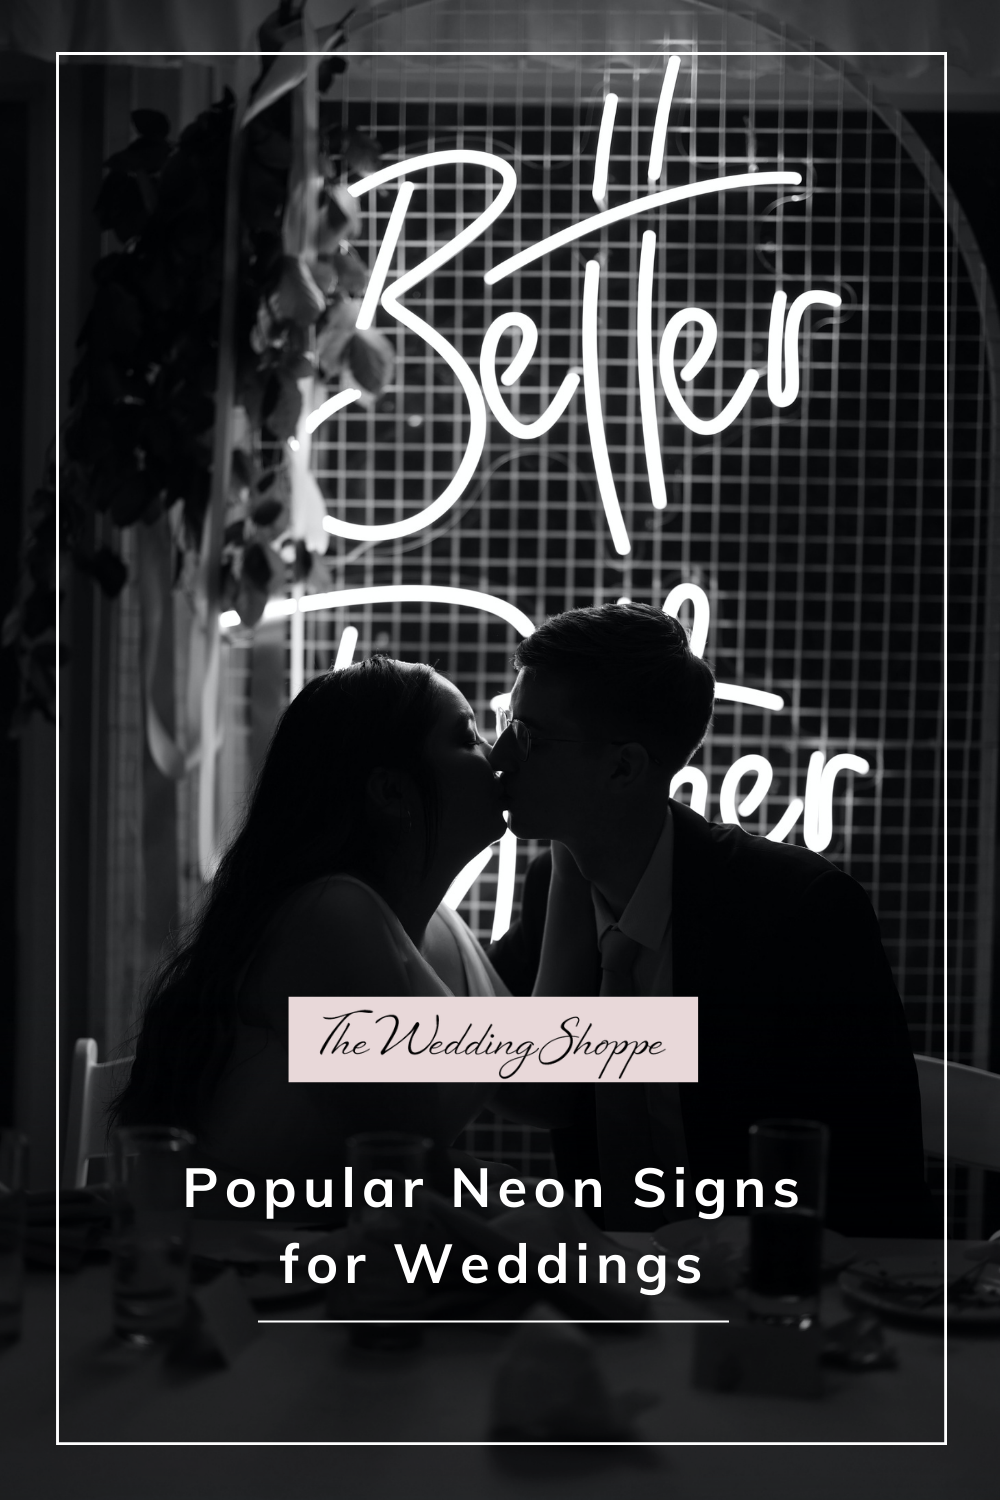 Blog post graphic for "Popular Neon Signs for Weddings"